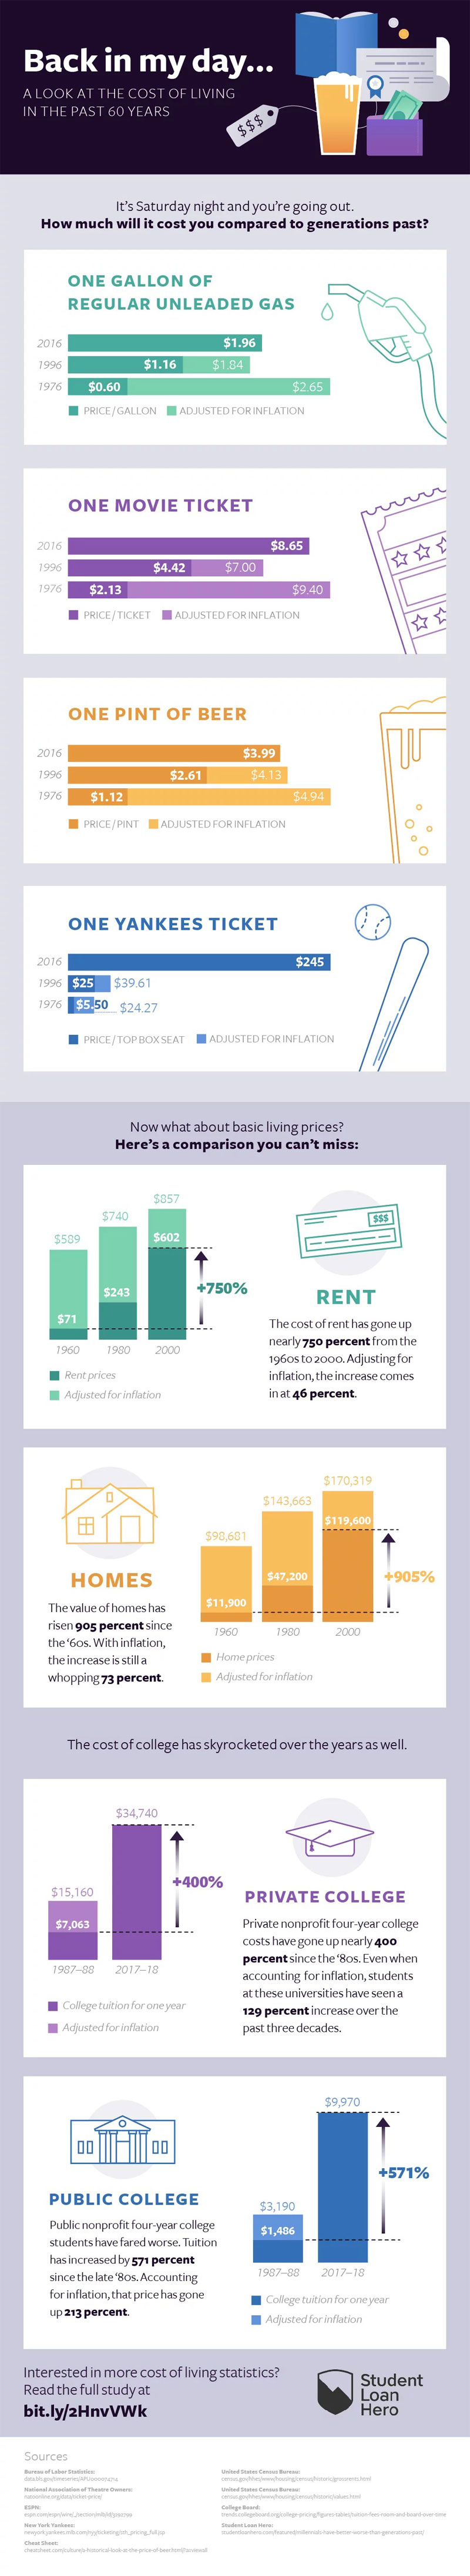 Do Millennials Have It Better or Worse Than Generations Past Infographic